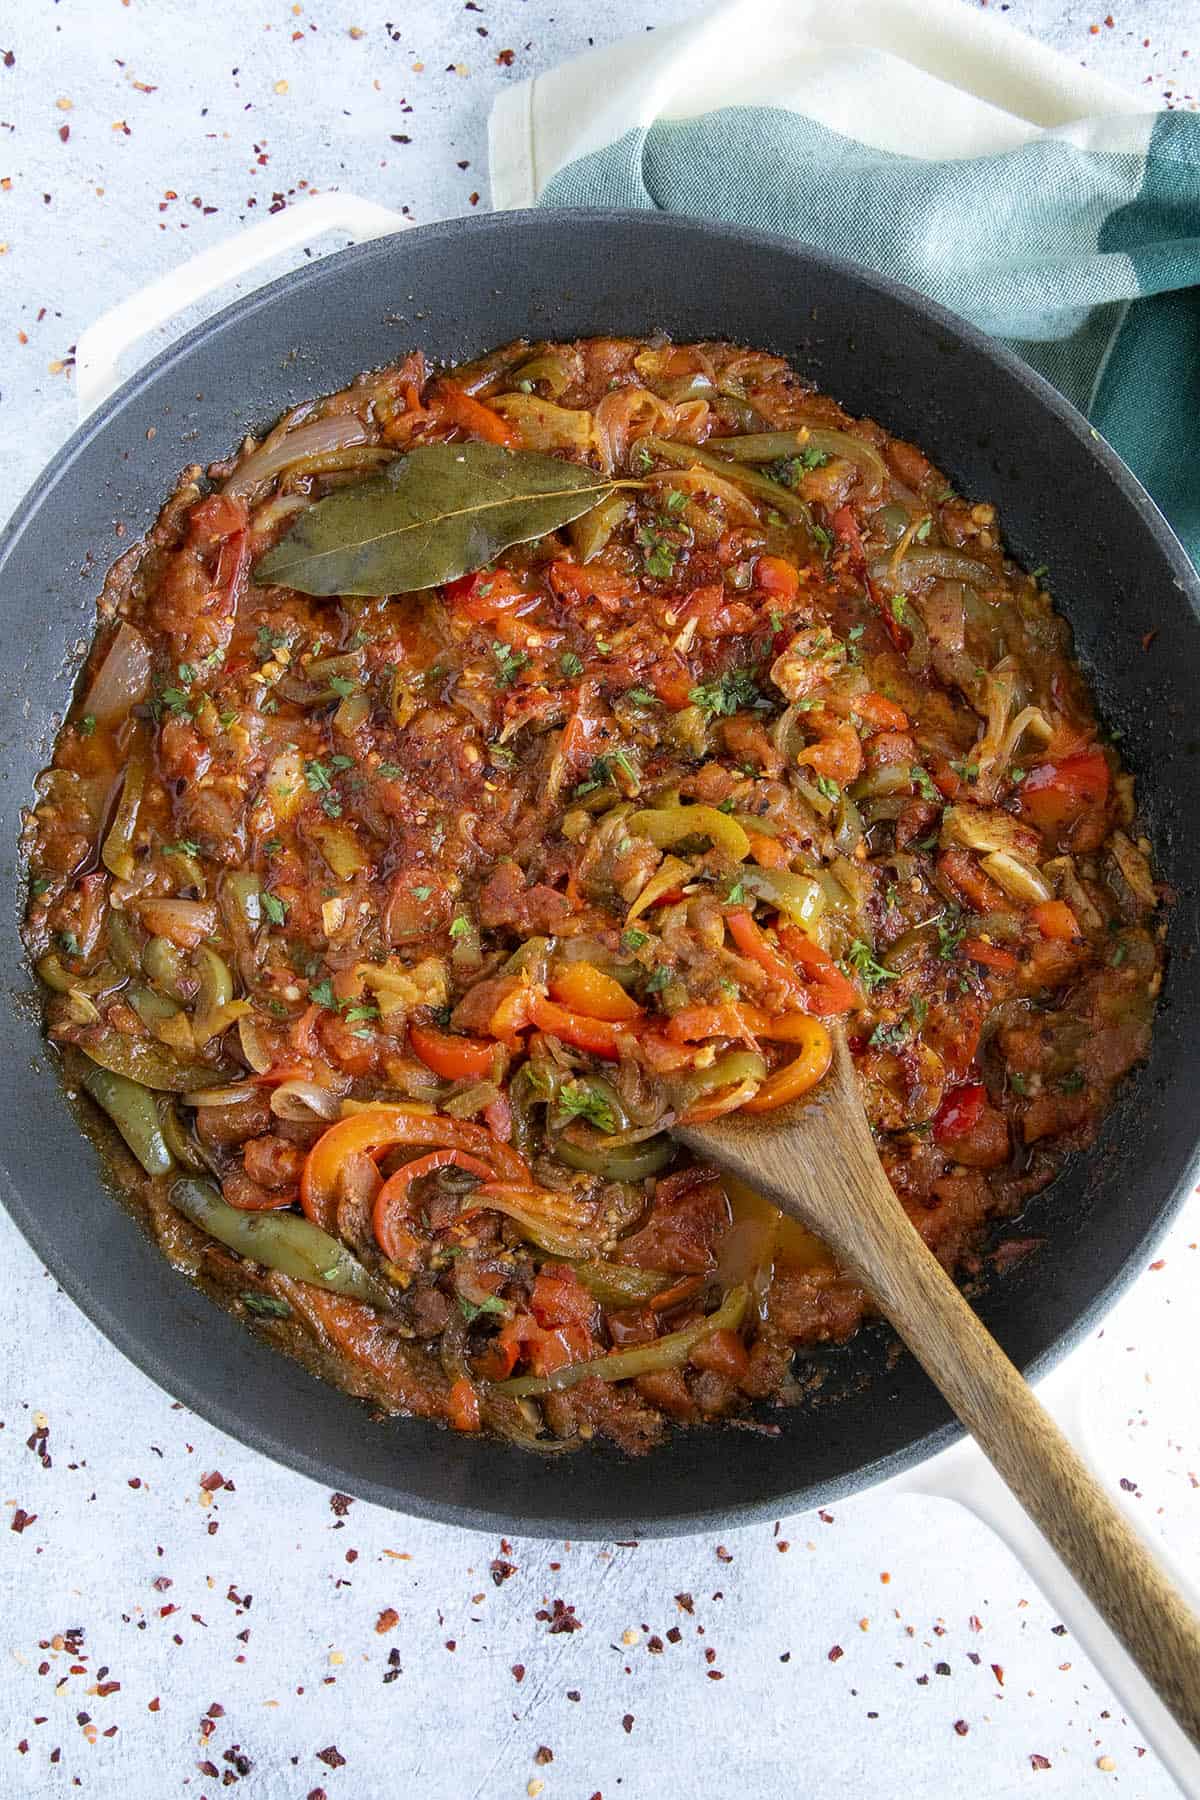 Piperade (Basque Tomato-Pepper Sauce) in a pan, ready to serve